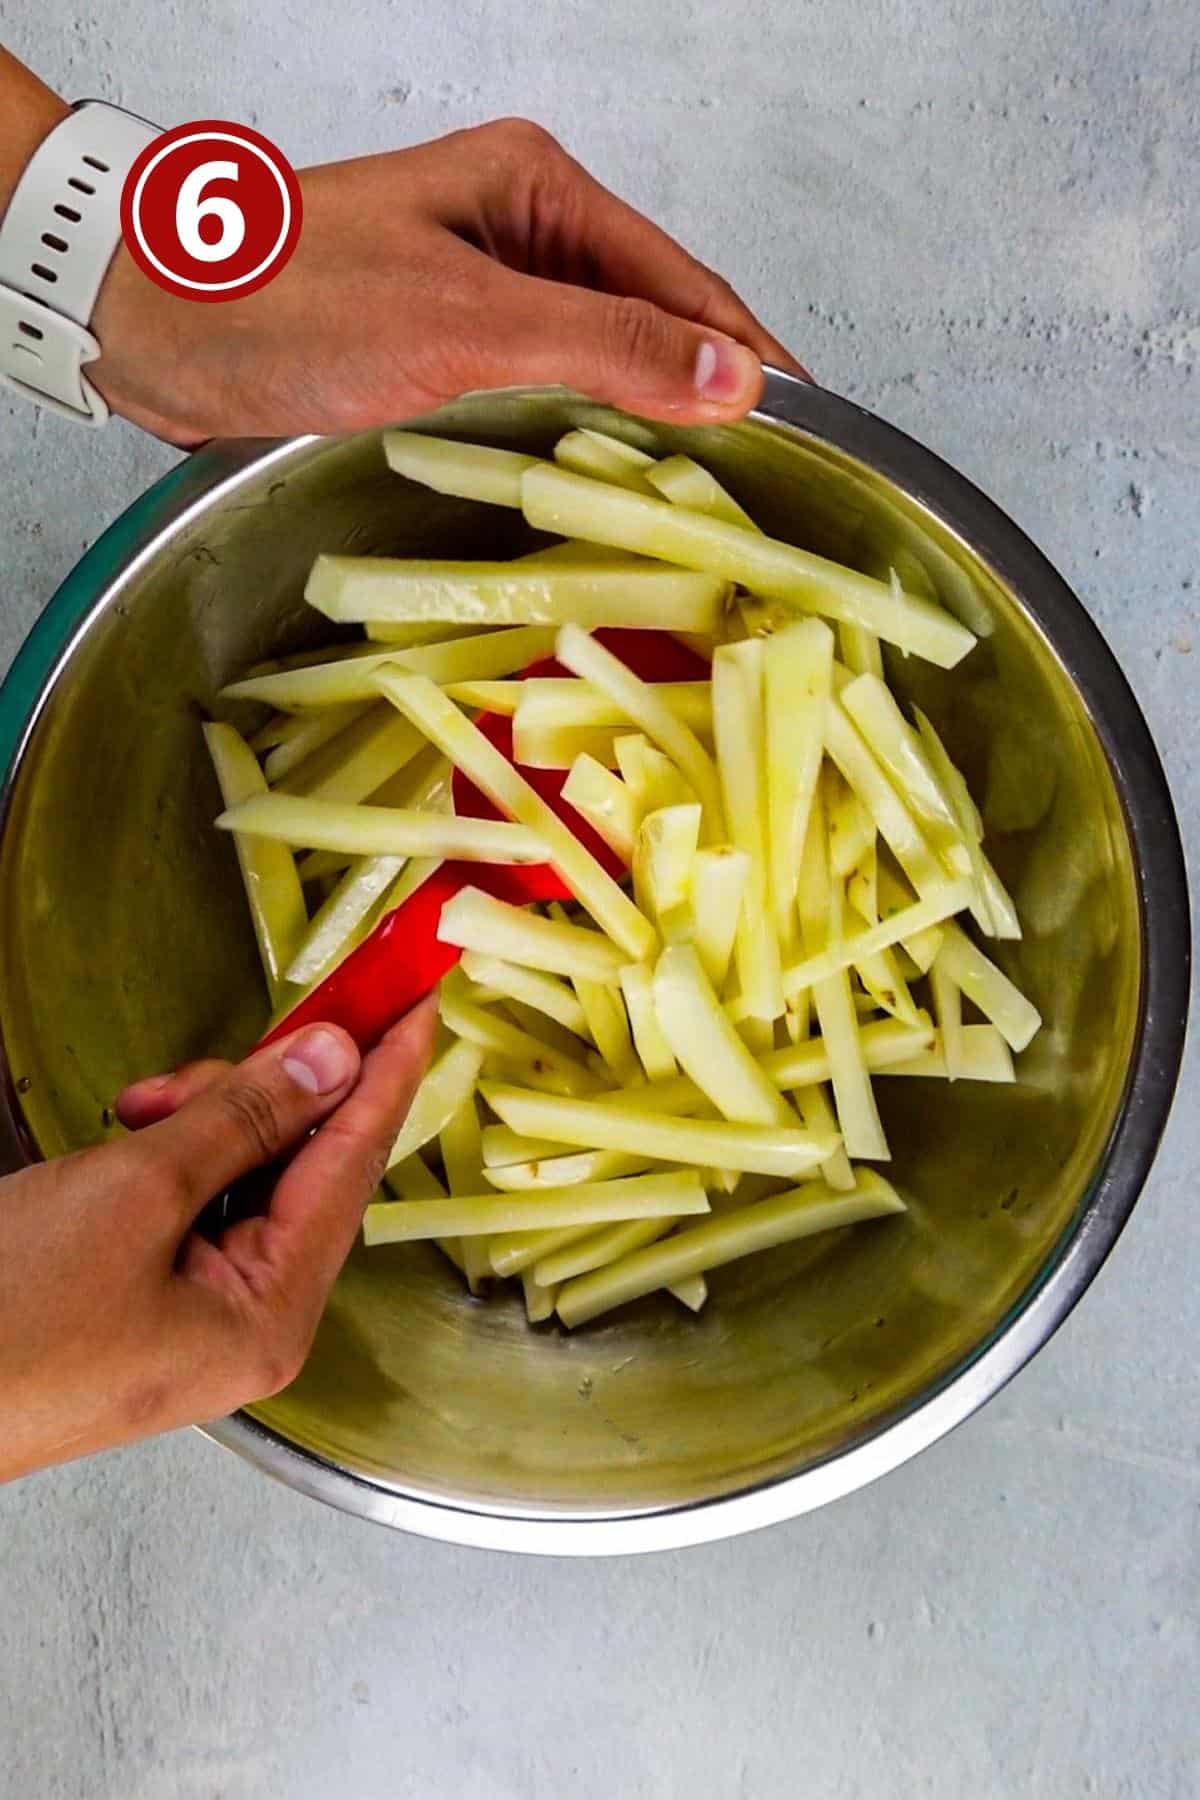 tossing the fries in the olive oil.